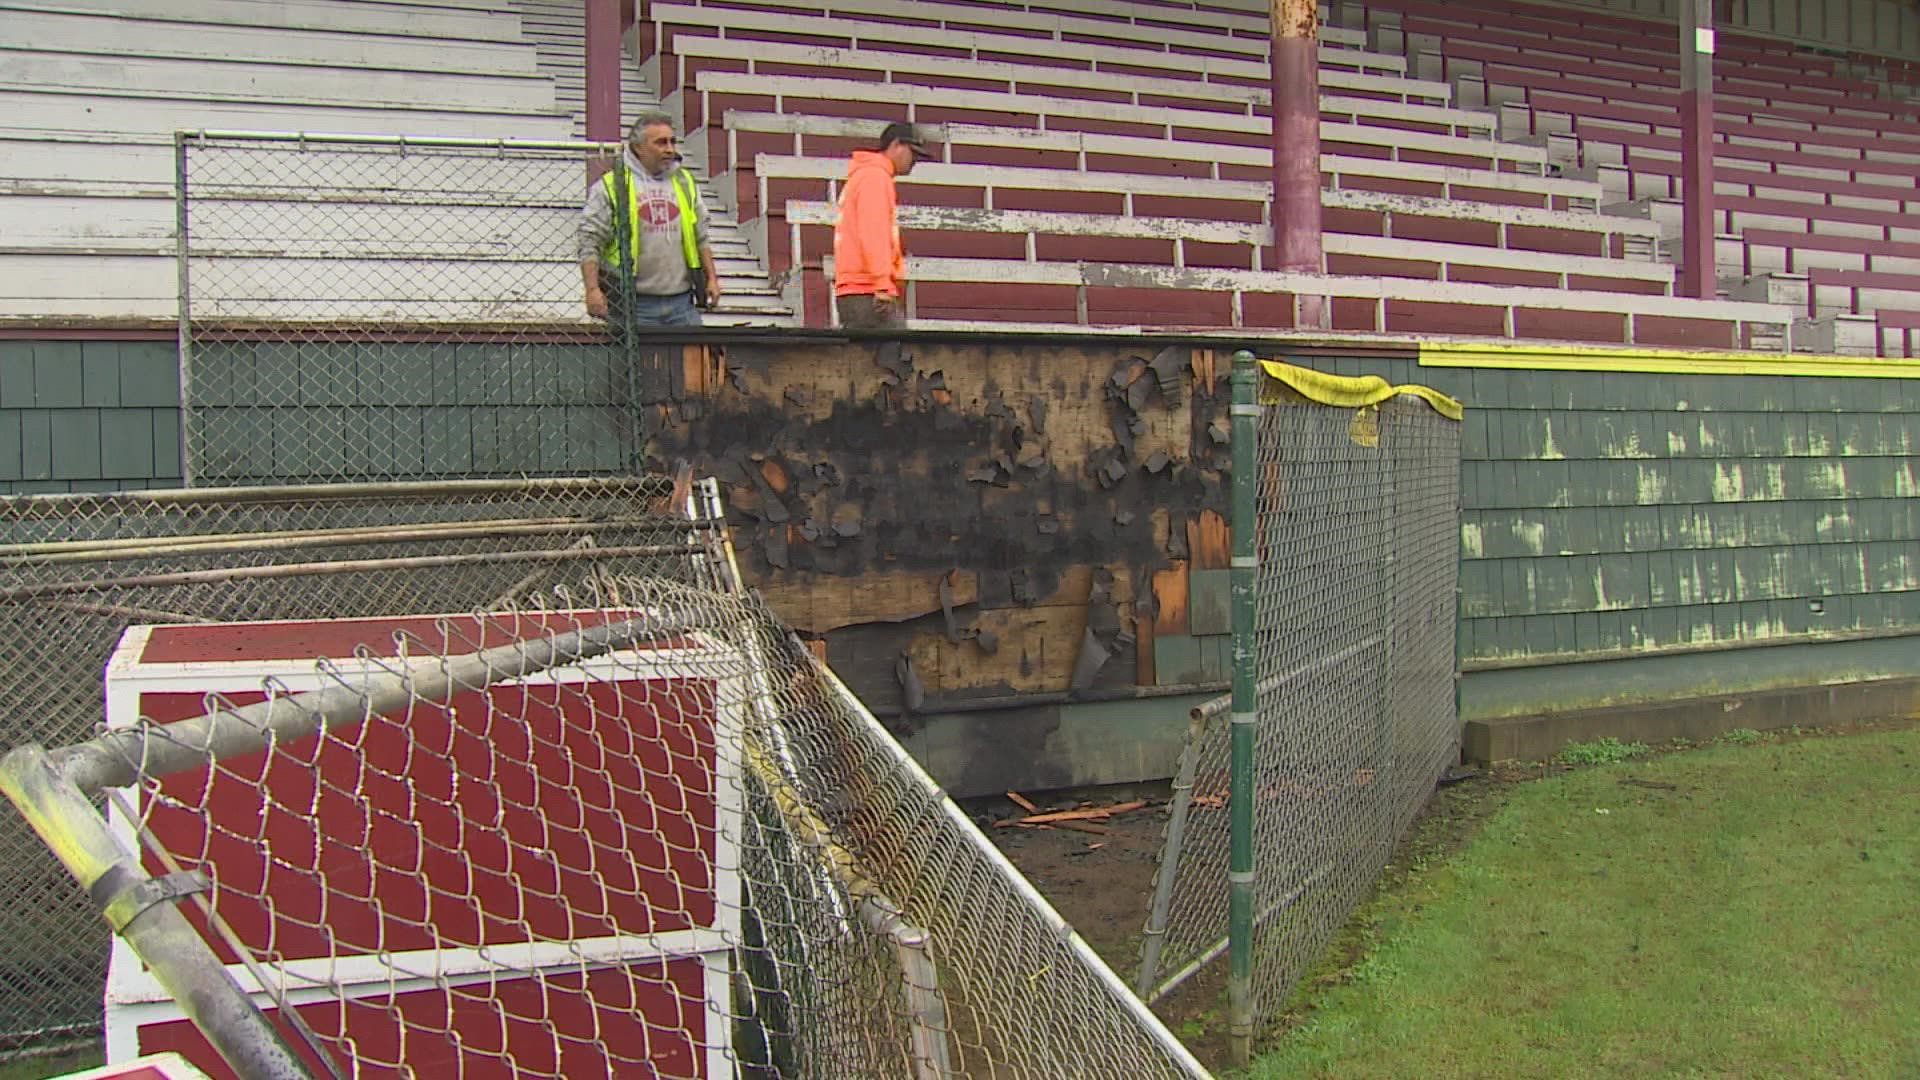 Built in 1938, Hoquiam's Olympic Stadium is on the National Register of Historic Places.